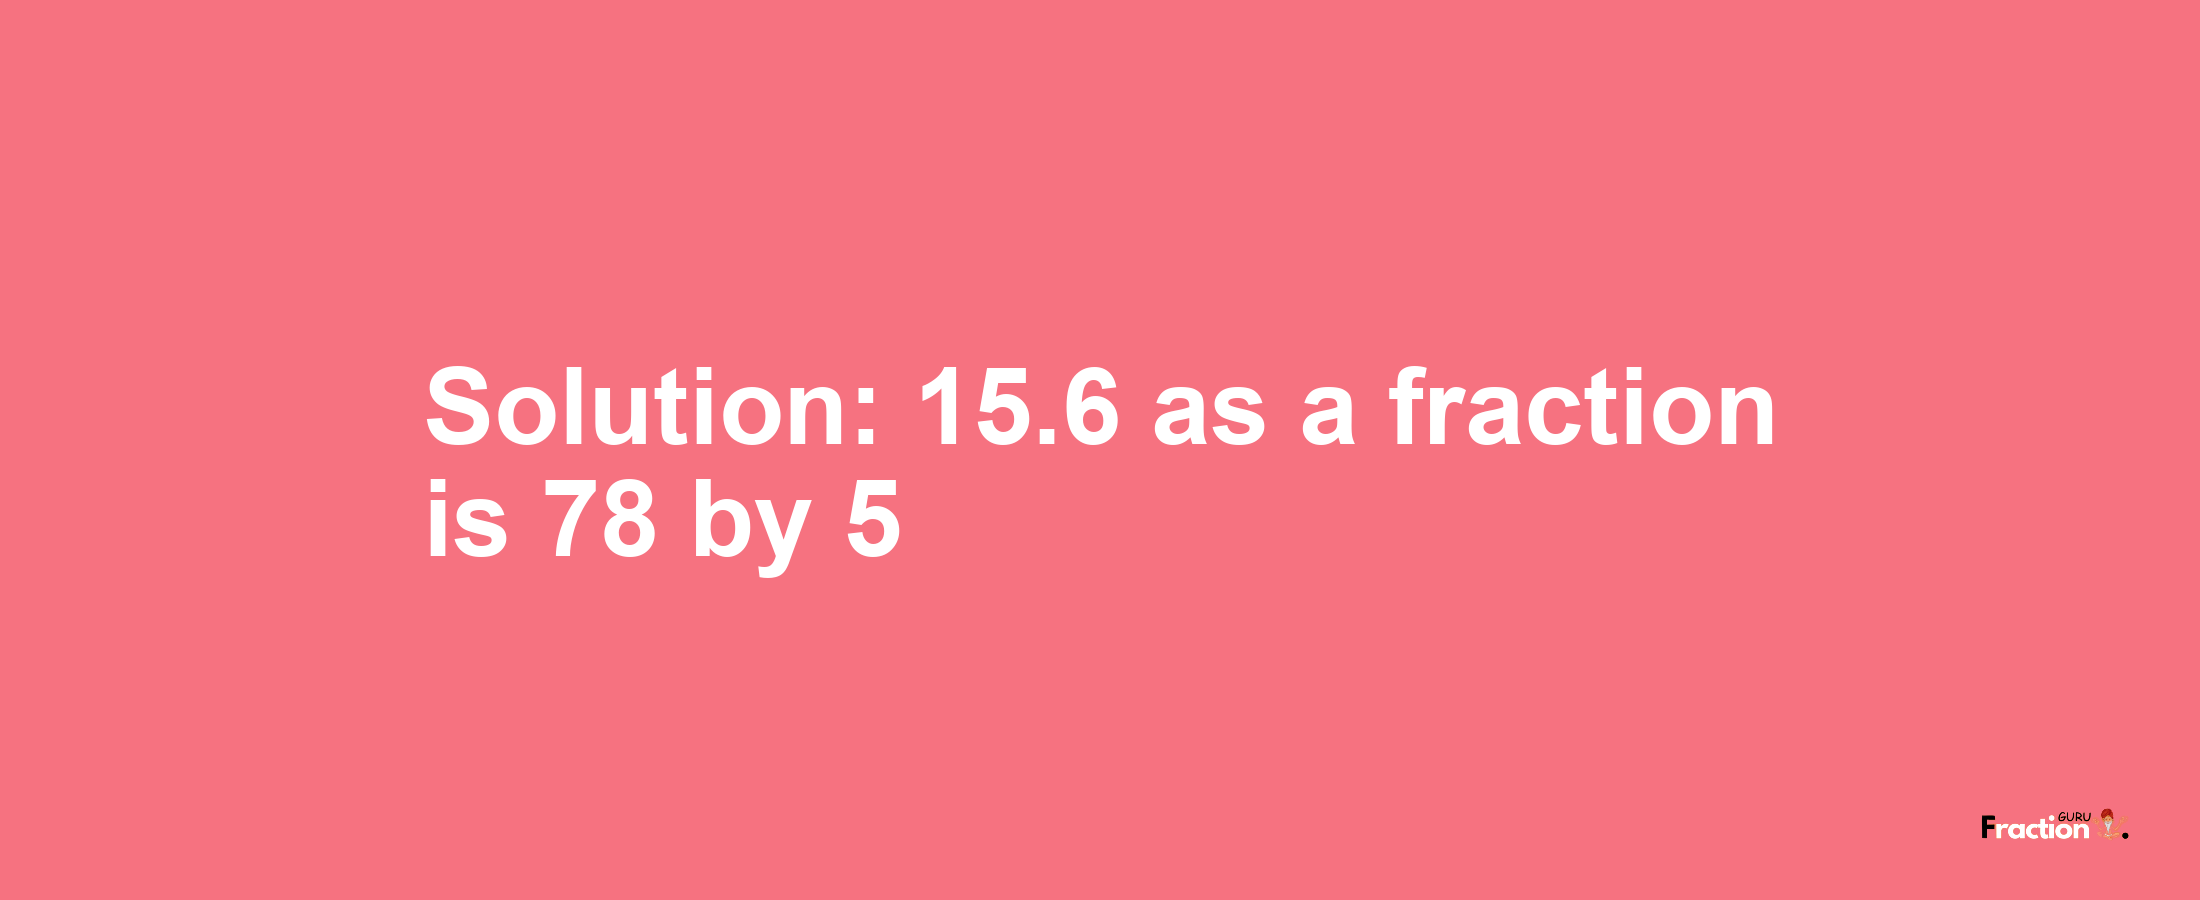 Solution:15.6 as a fraction is 78/5